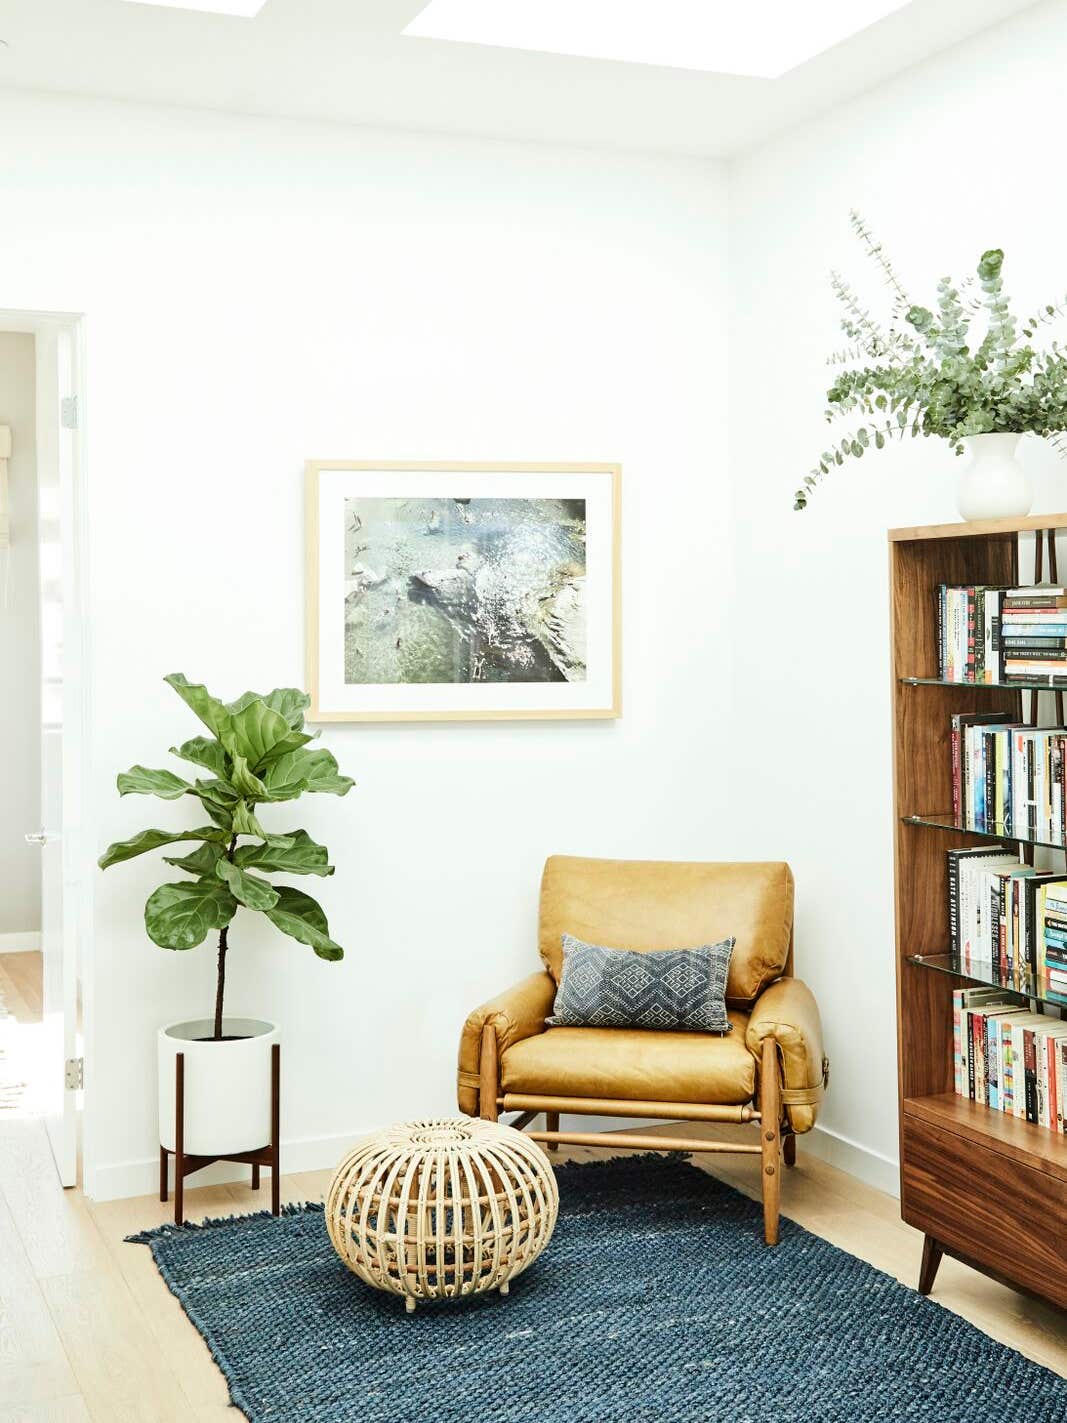 Cali Cool Takes on a New Meaning in This Light-Filled Home